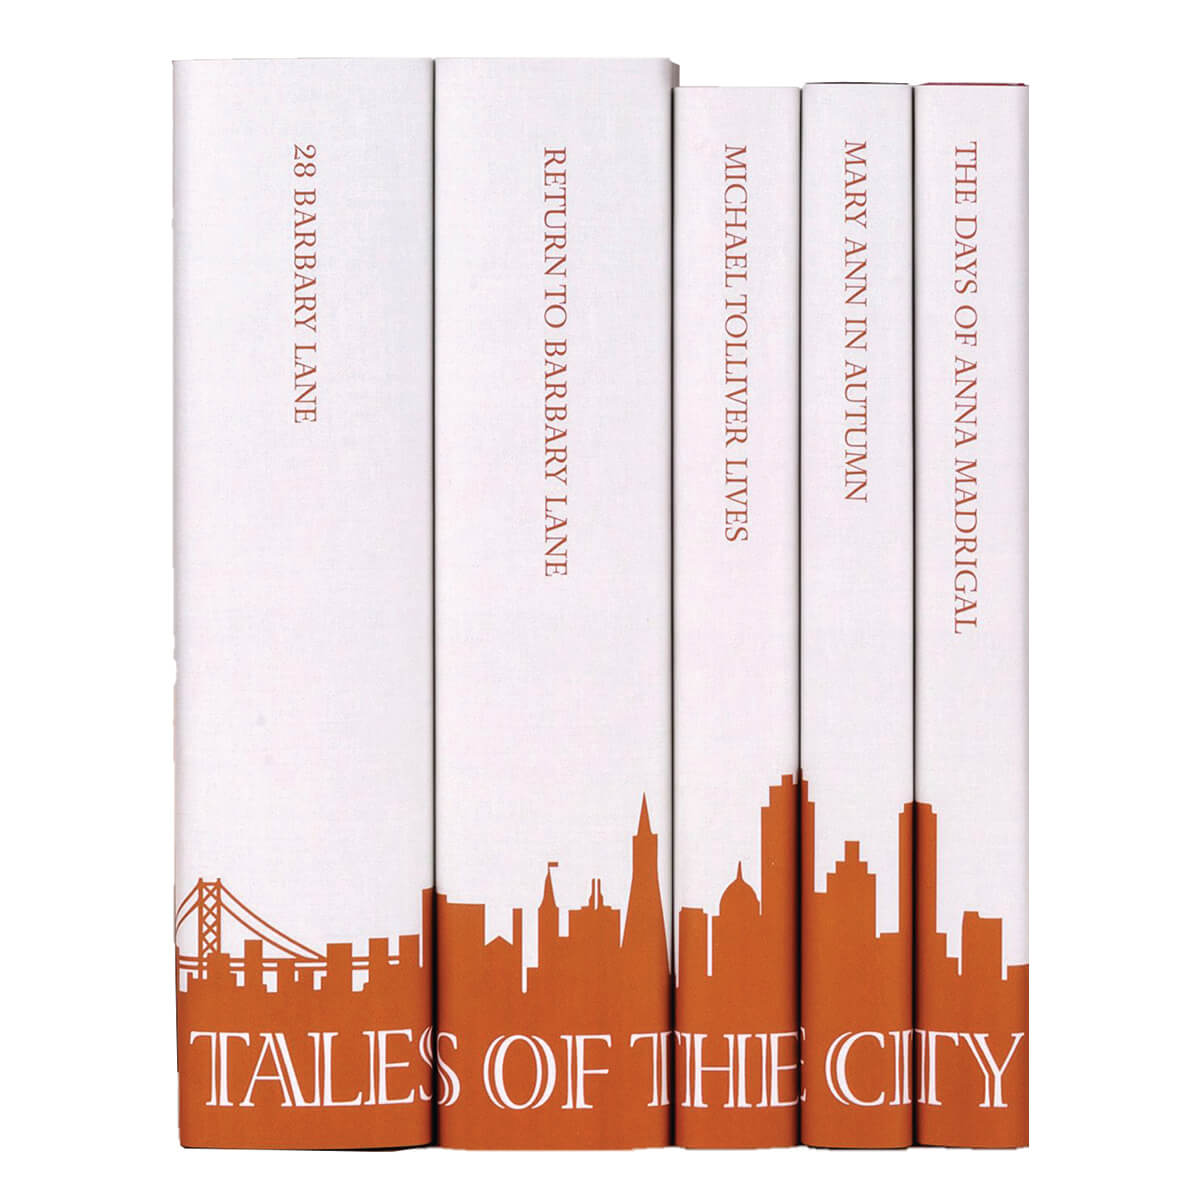 Tales of the City by Armistead Maupin - MTO